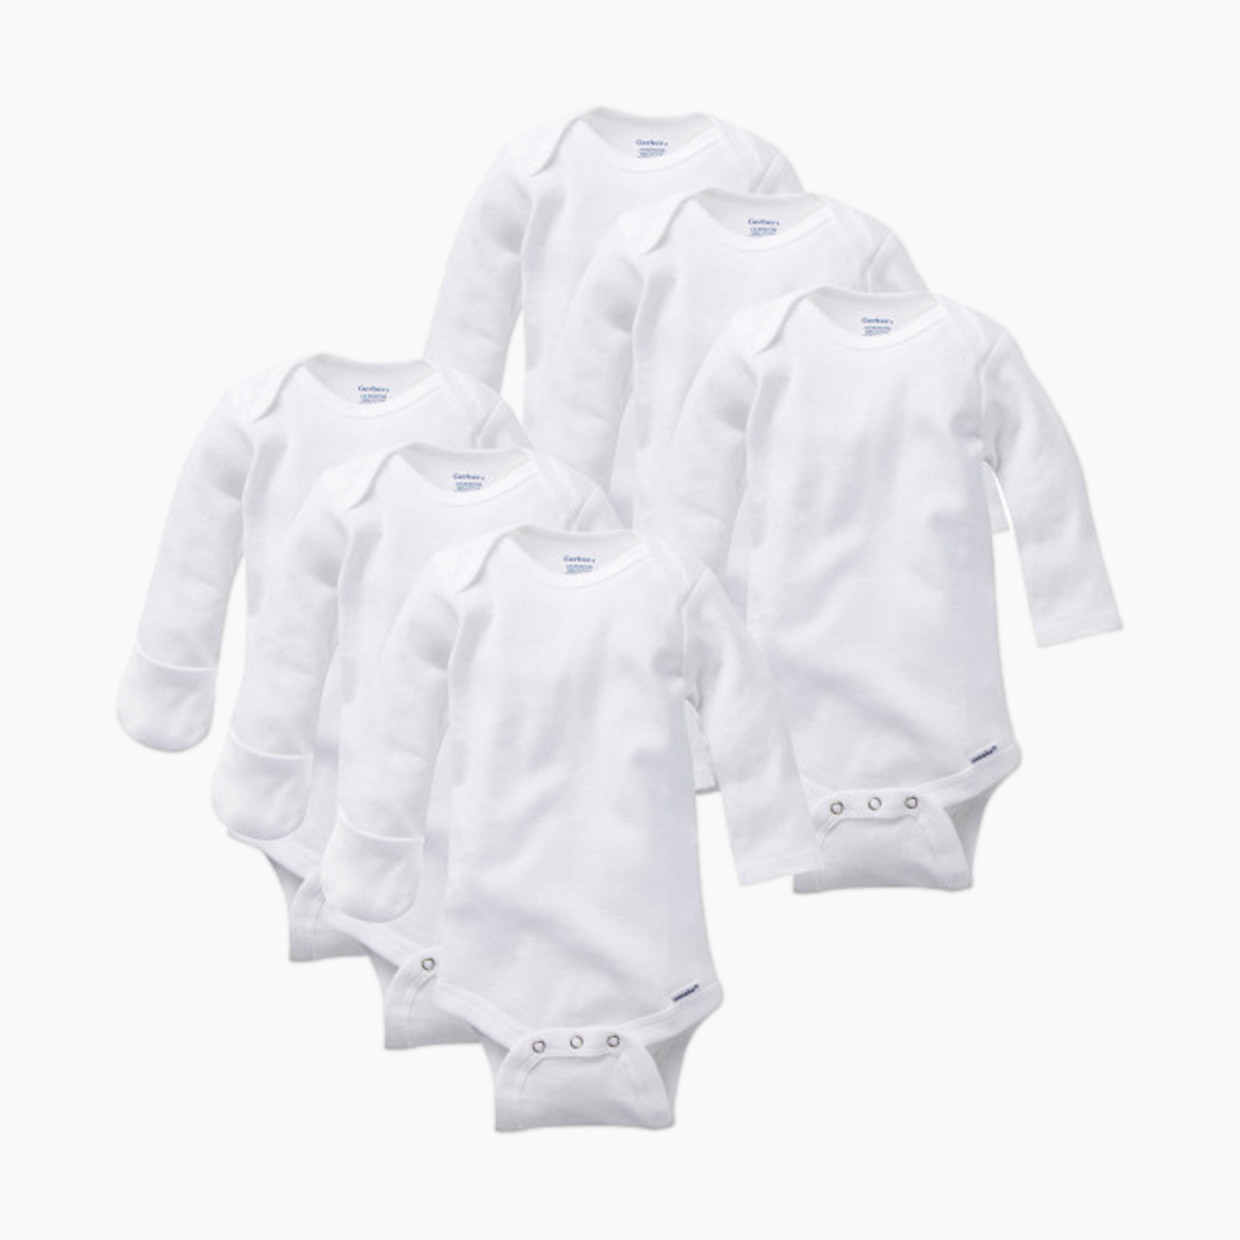 Gerber Long Sleeve Solid Onesies Bodysuit with Mitten Cuffs (6 Pack) - White, 0-3 M.